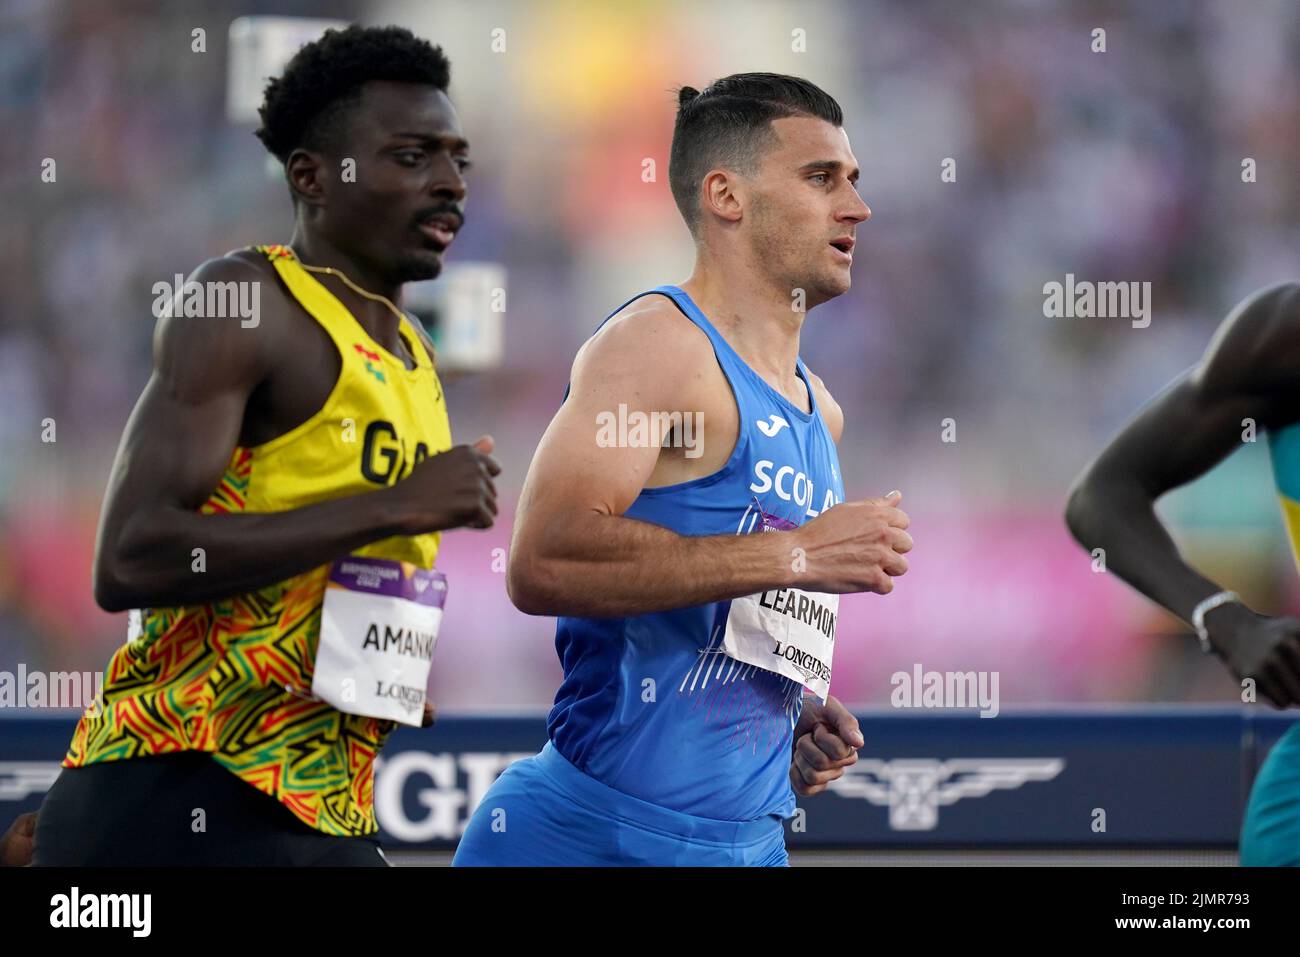 Scotland’s Guy Learmonth in action during the Men’s 800m Final at Alexander Stadium on day ten of the 2022 Commonwealth Games in Birmingham. Picture date: Sunday August 7, 2022. Stock Photo